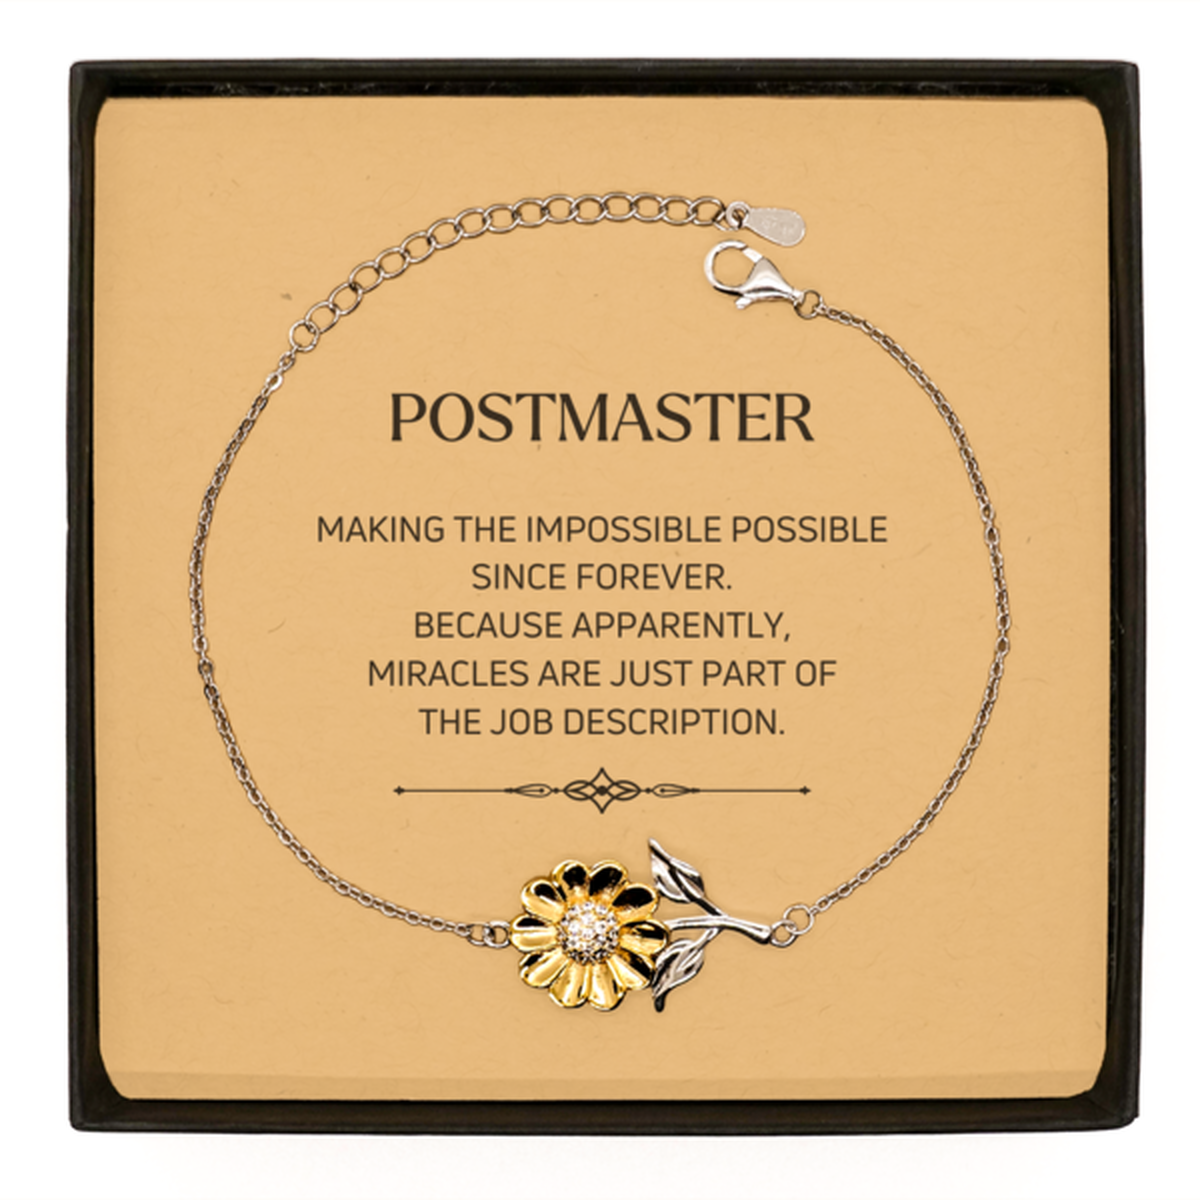 Funny Postmaster Gifts, Miracles are just part of the job description, Inspirational Birthday Sunflower Bracelet For Postmaster, Men, Women, Coworkers, Friends, Boss